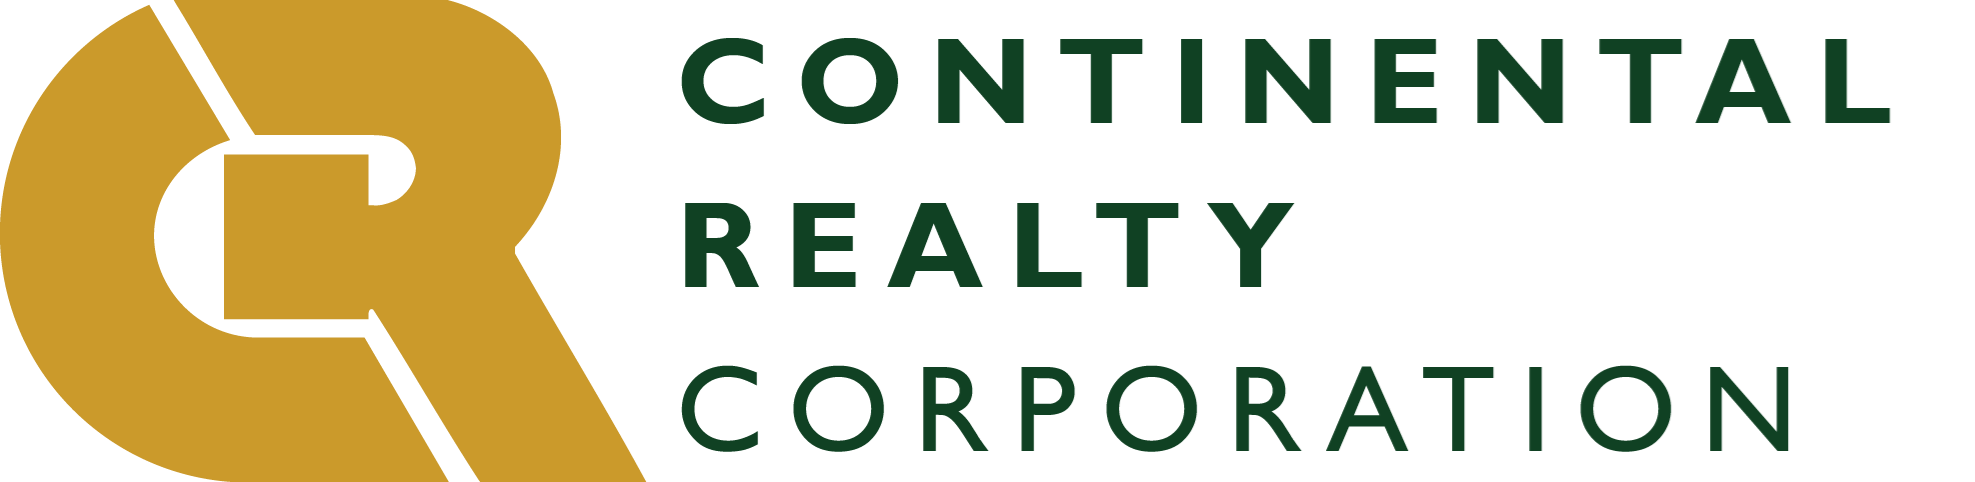 Continential-Realty-Corporation-Grant-Fischesser